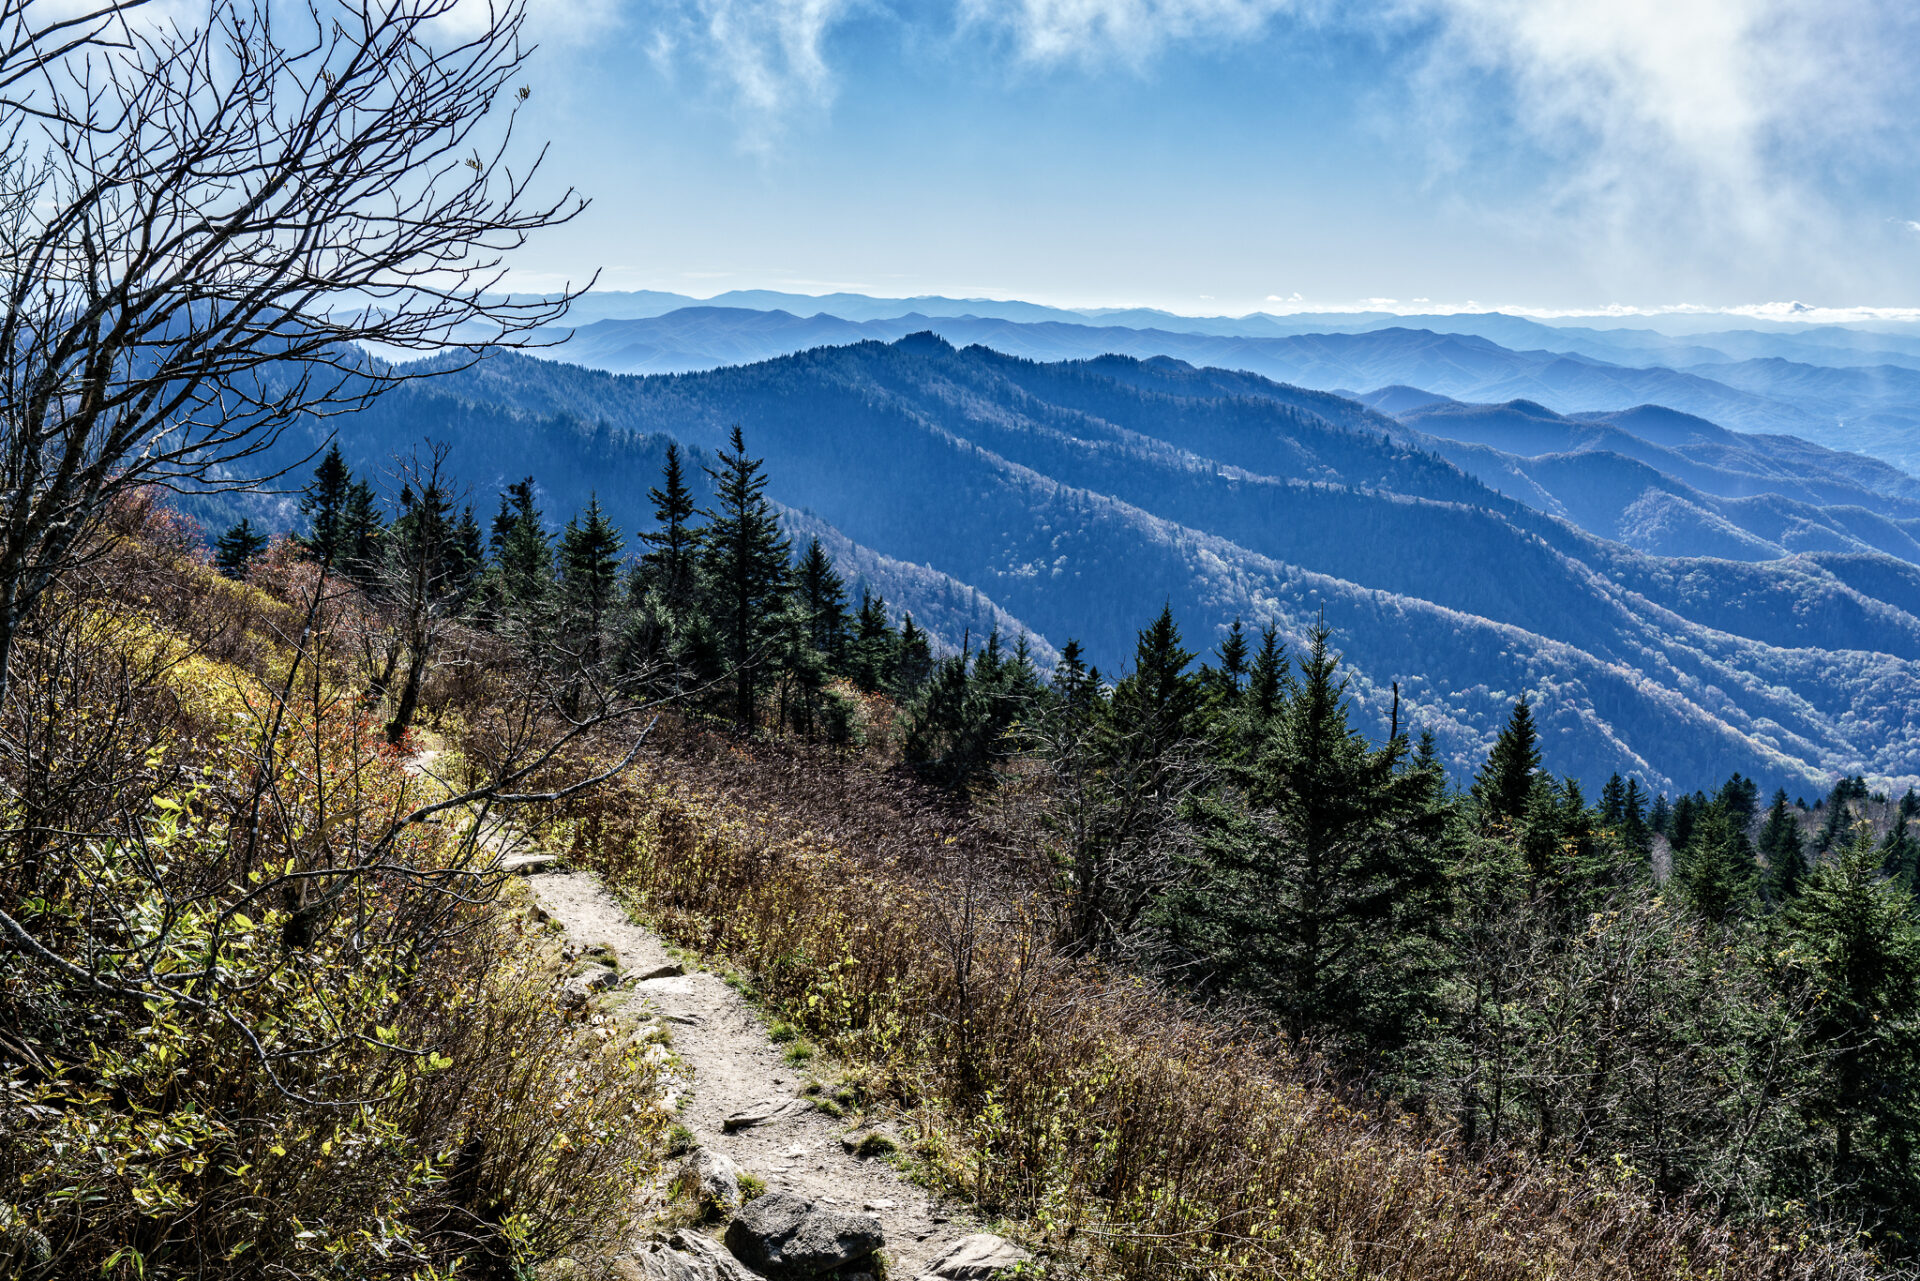 Layers of Mountains from Waterrock Knob Trail on Blue Ridge Parkway